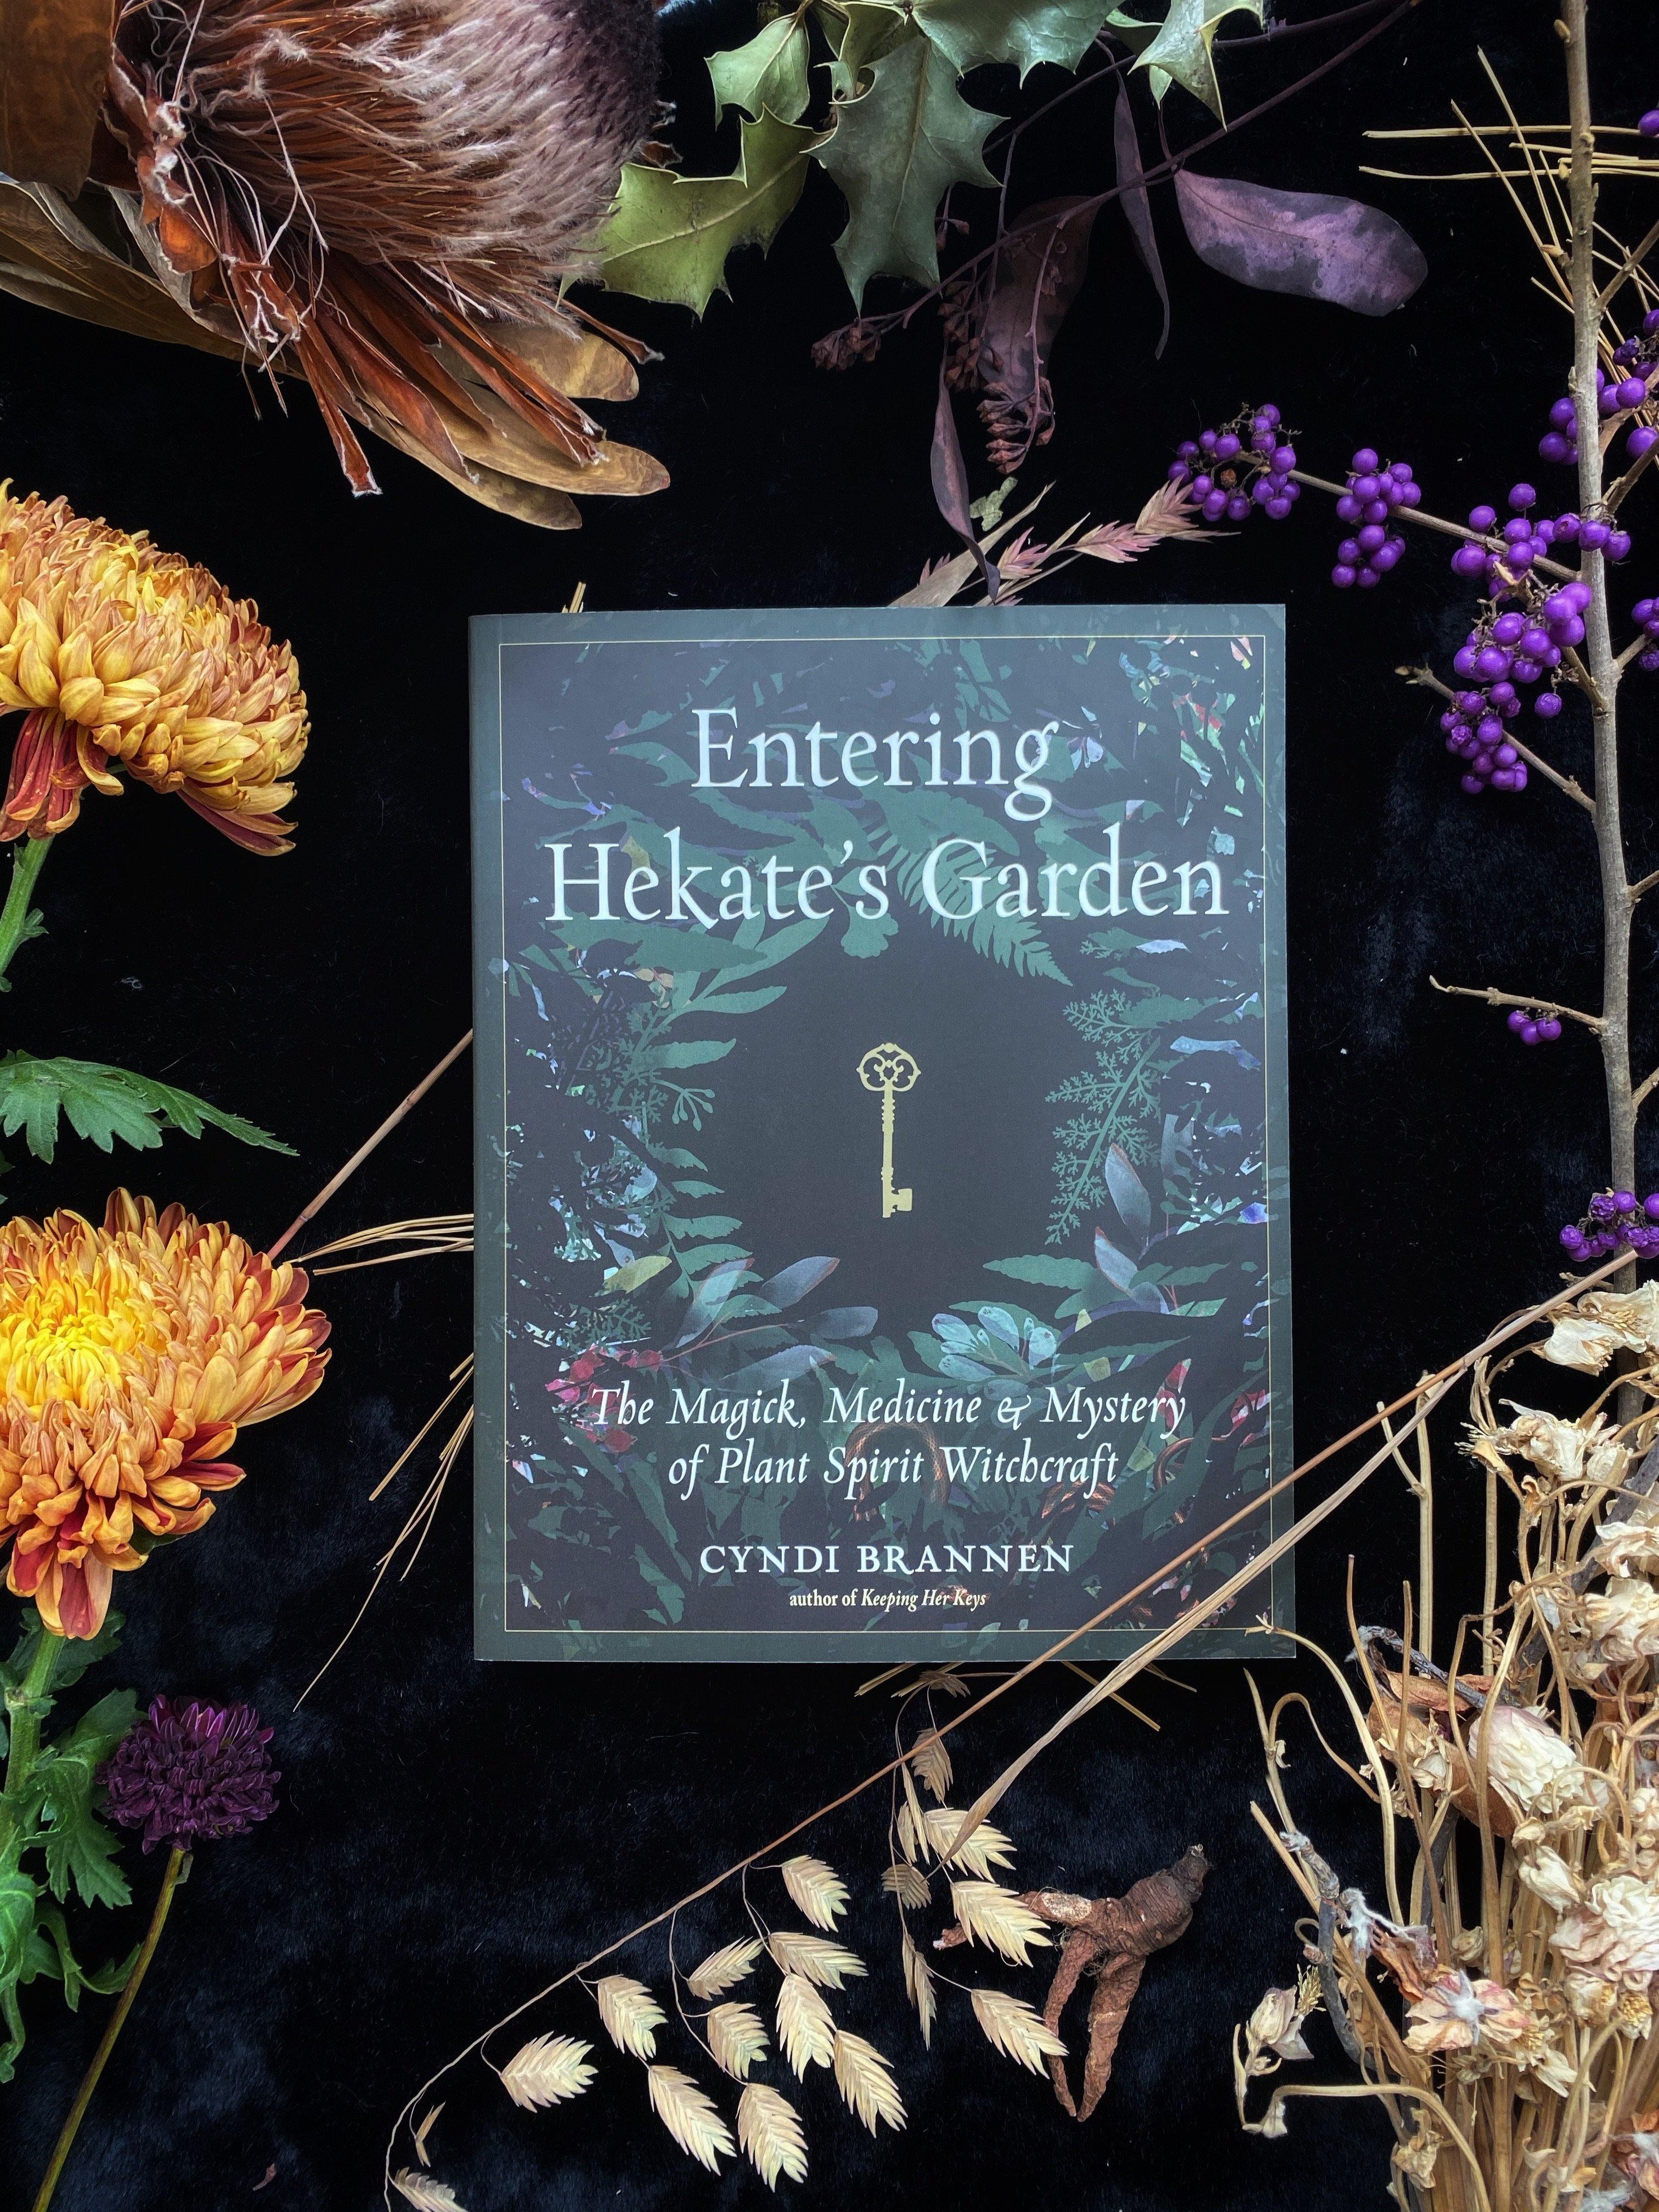 Entering Hekate's Garden: The Magick, Medicine & Mystery of Plant Spirit Witchcraft - qmeb